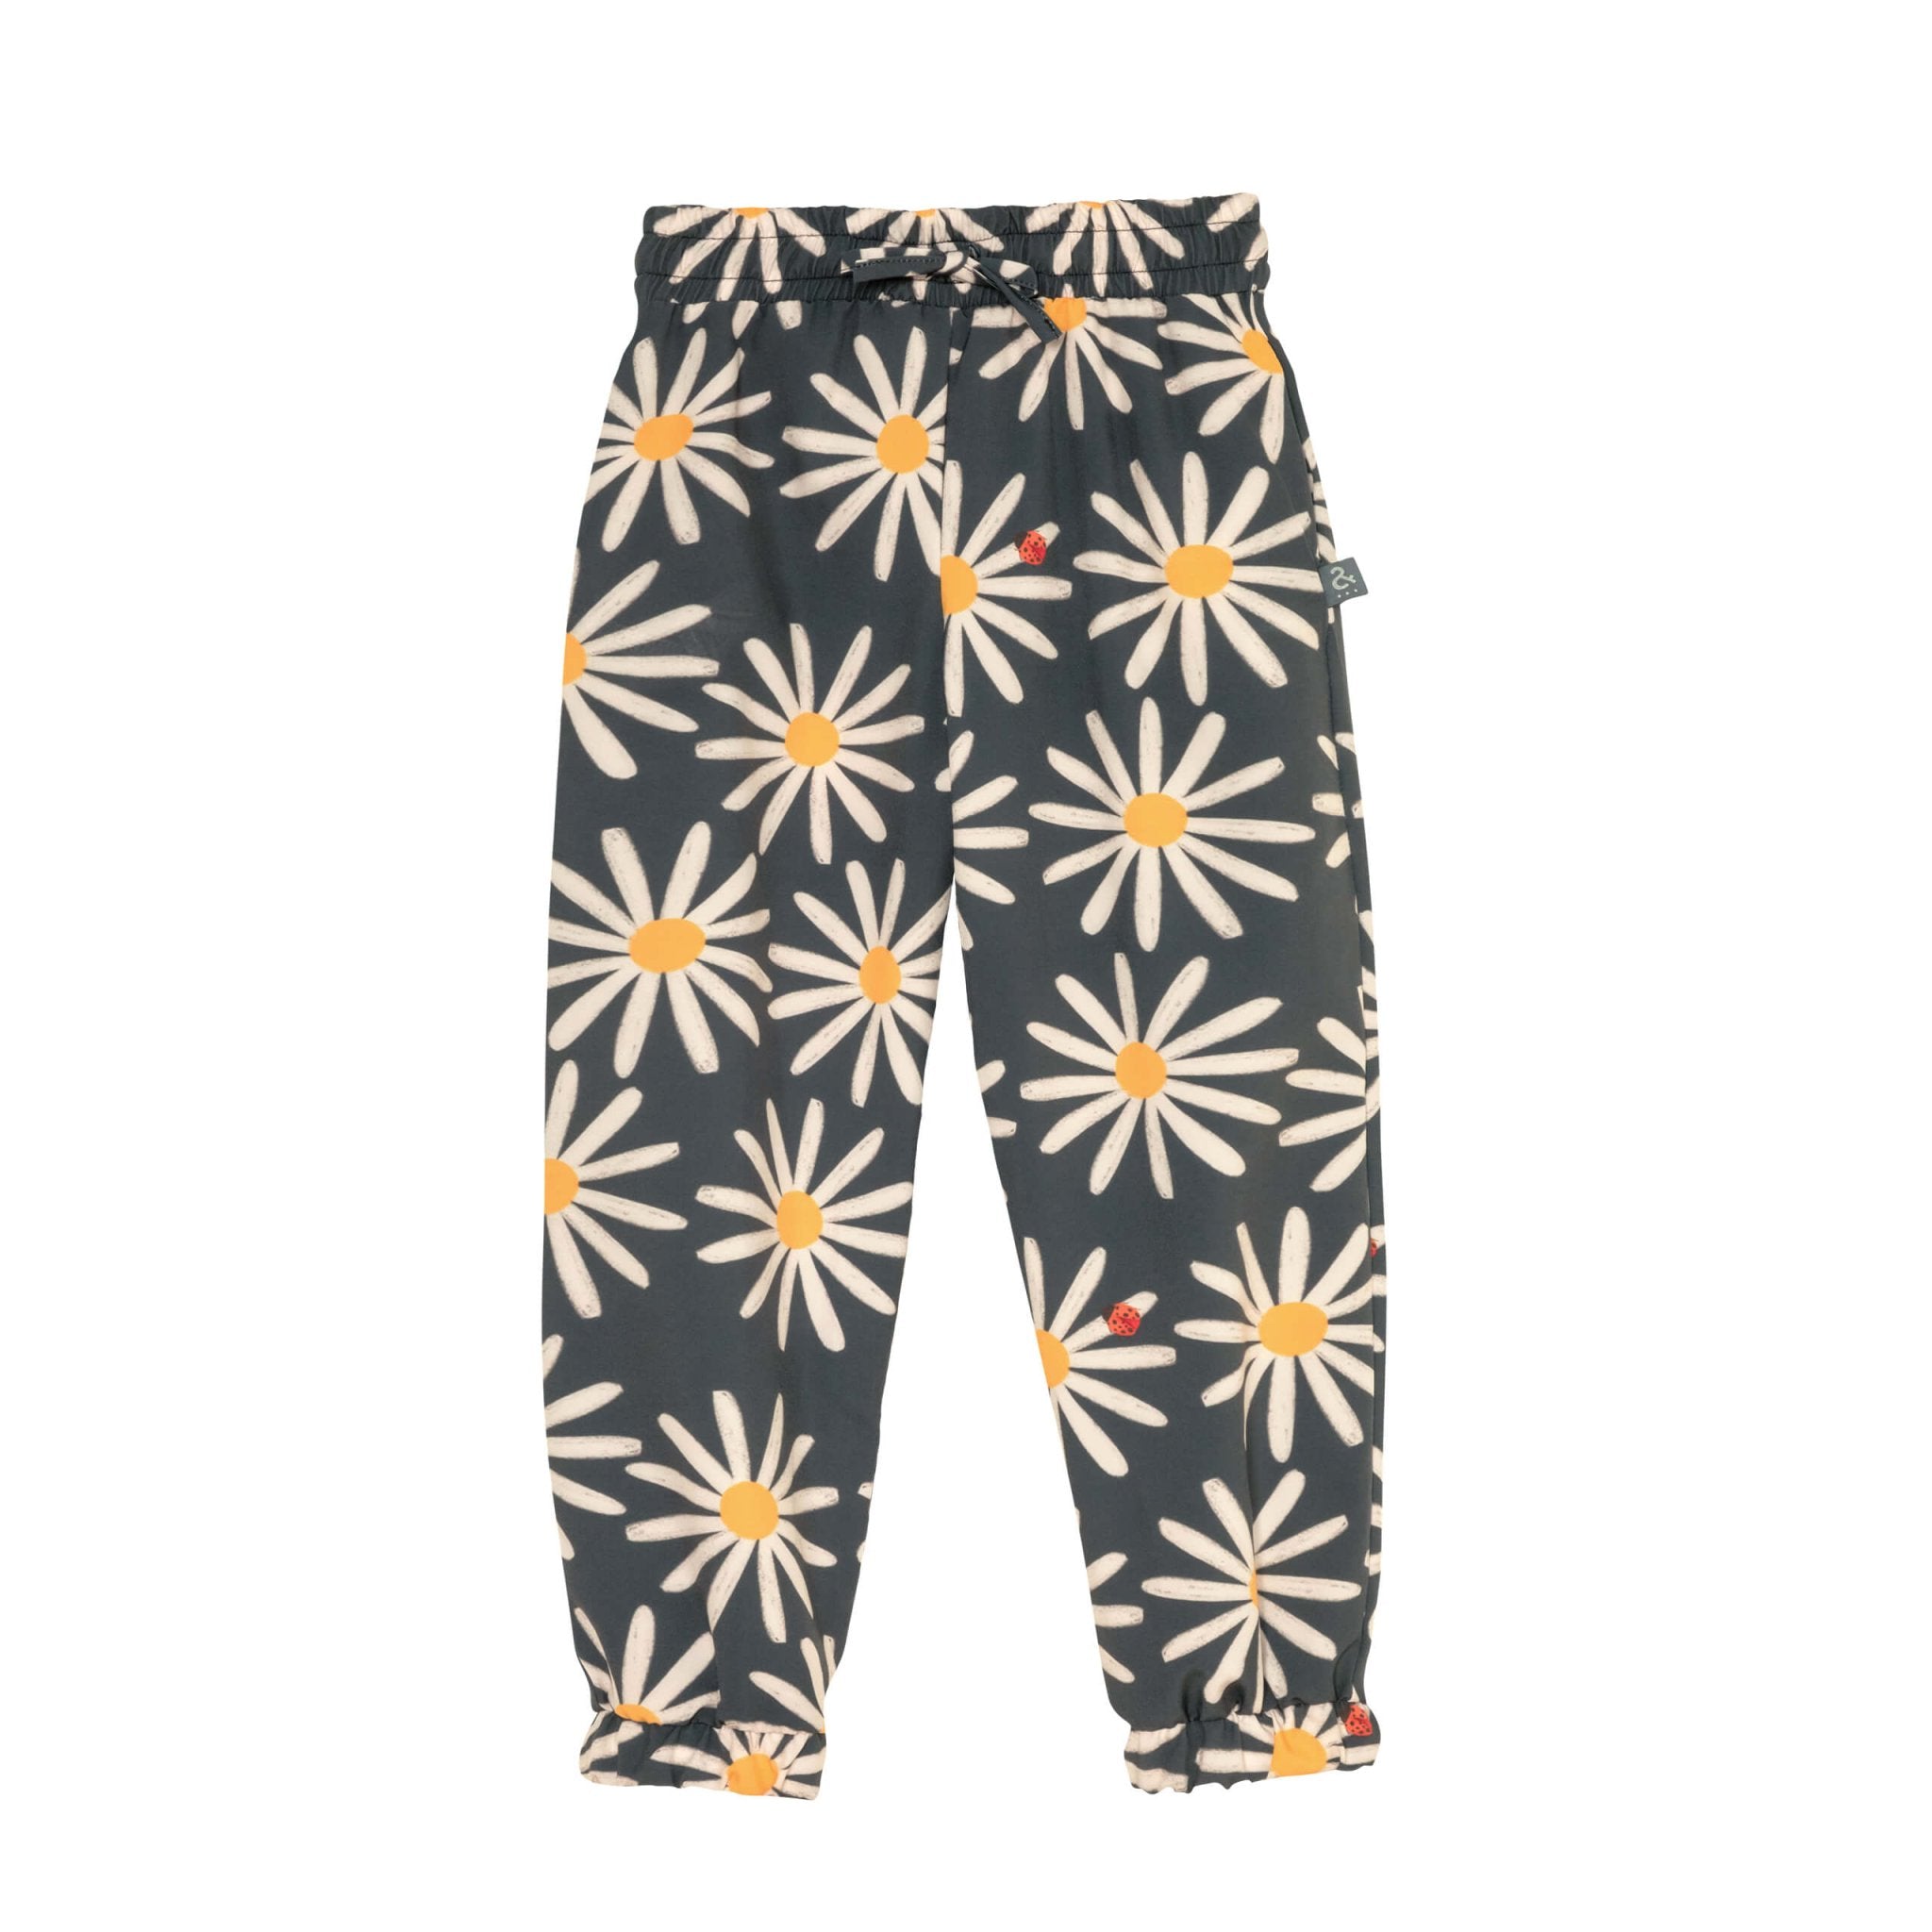 Adorable grey sunflower printed pants for girls. It has a drawstring waist and cinched legs. Also ittle ladybug details. The pants are shown over a white background.